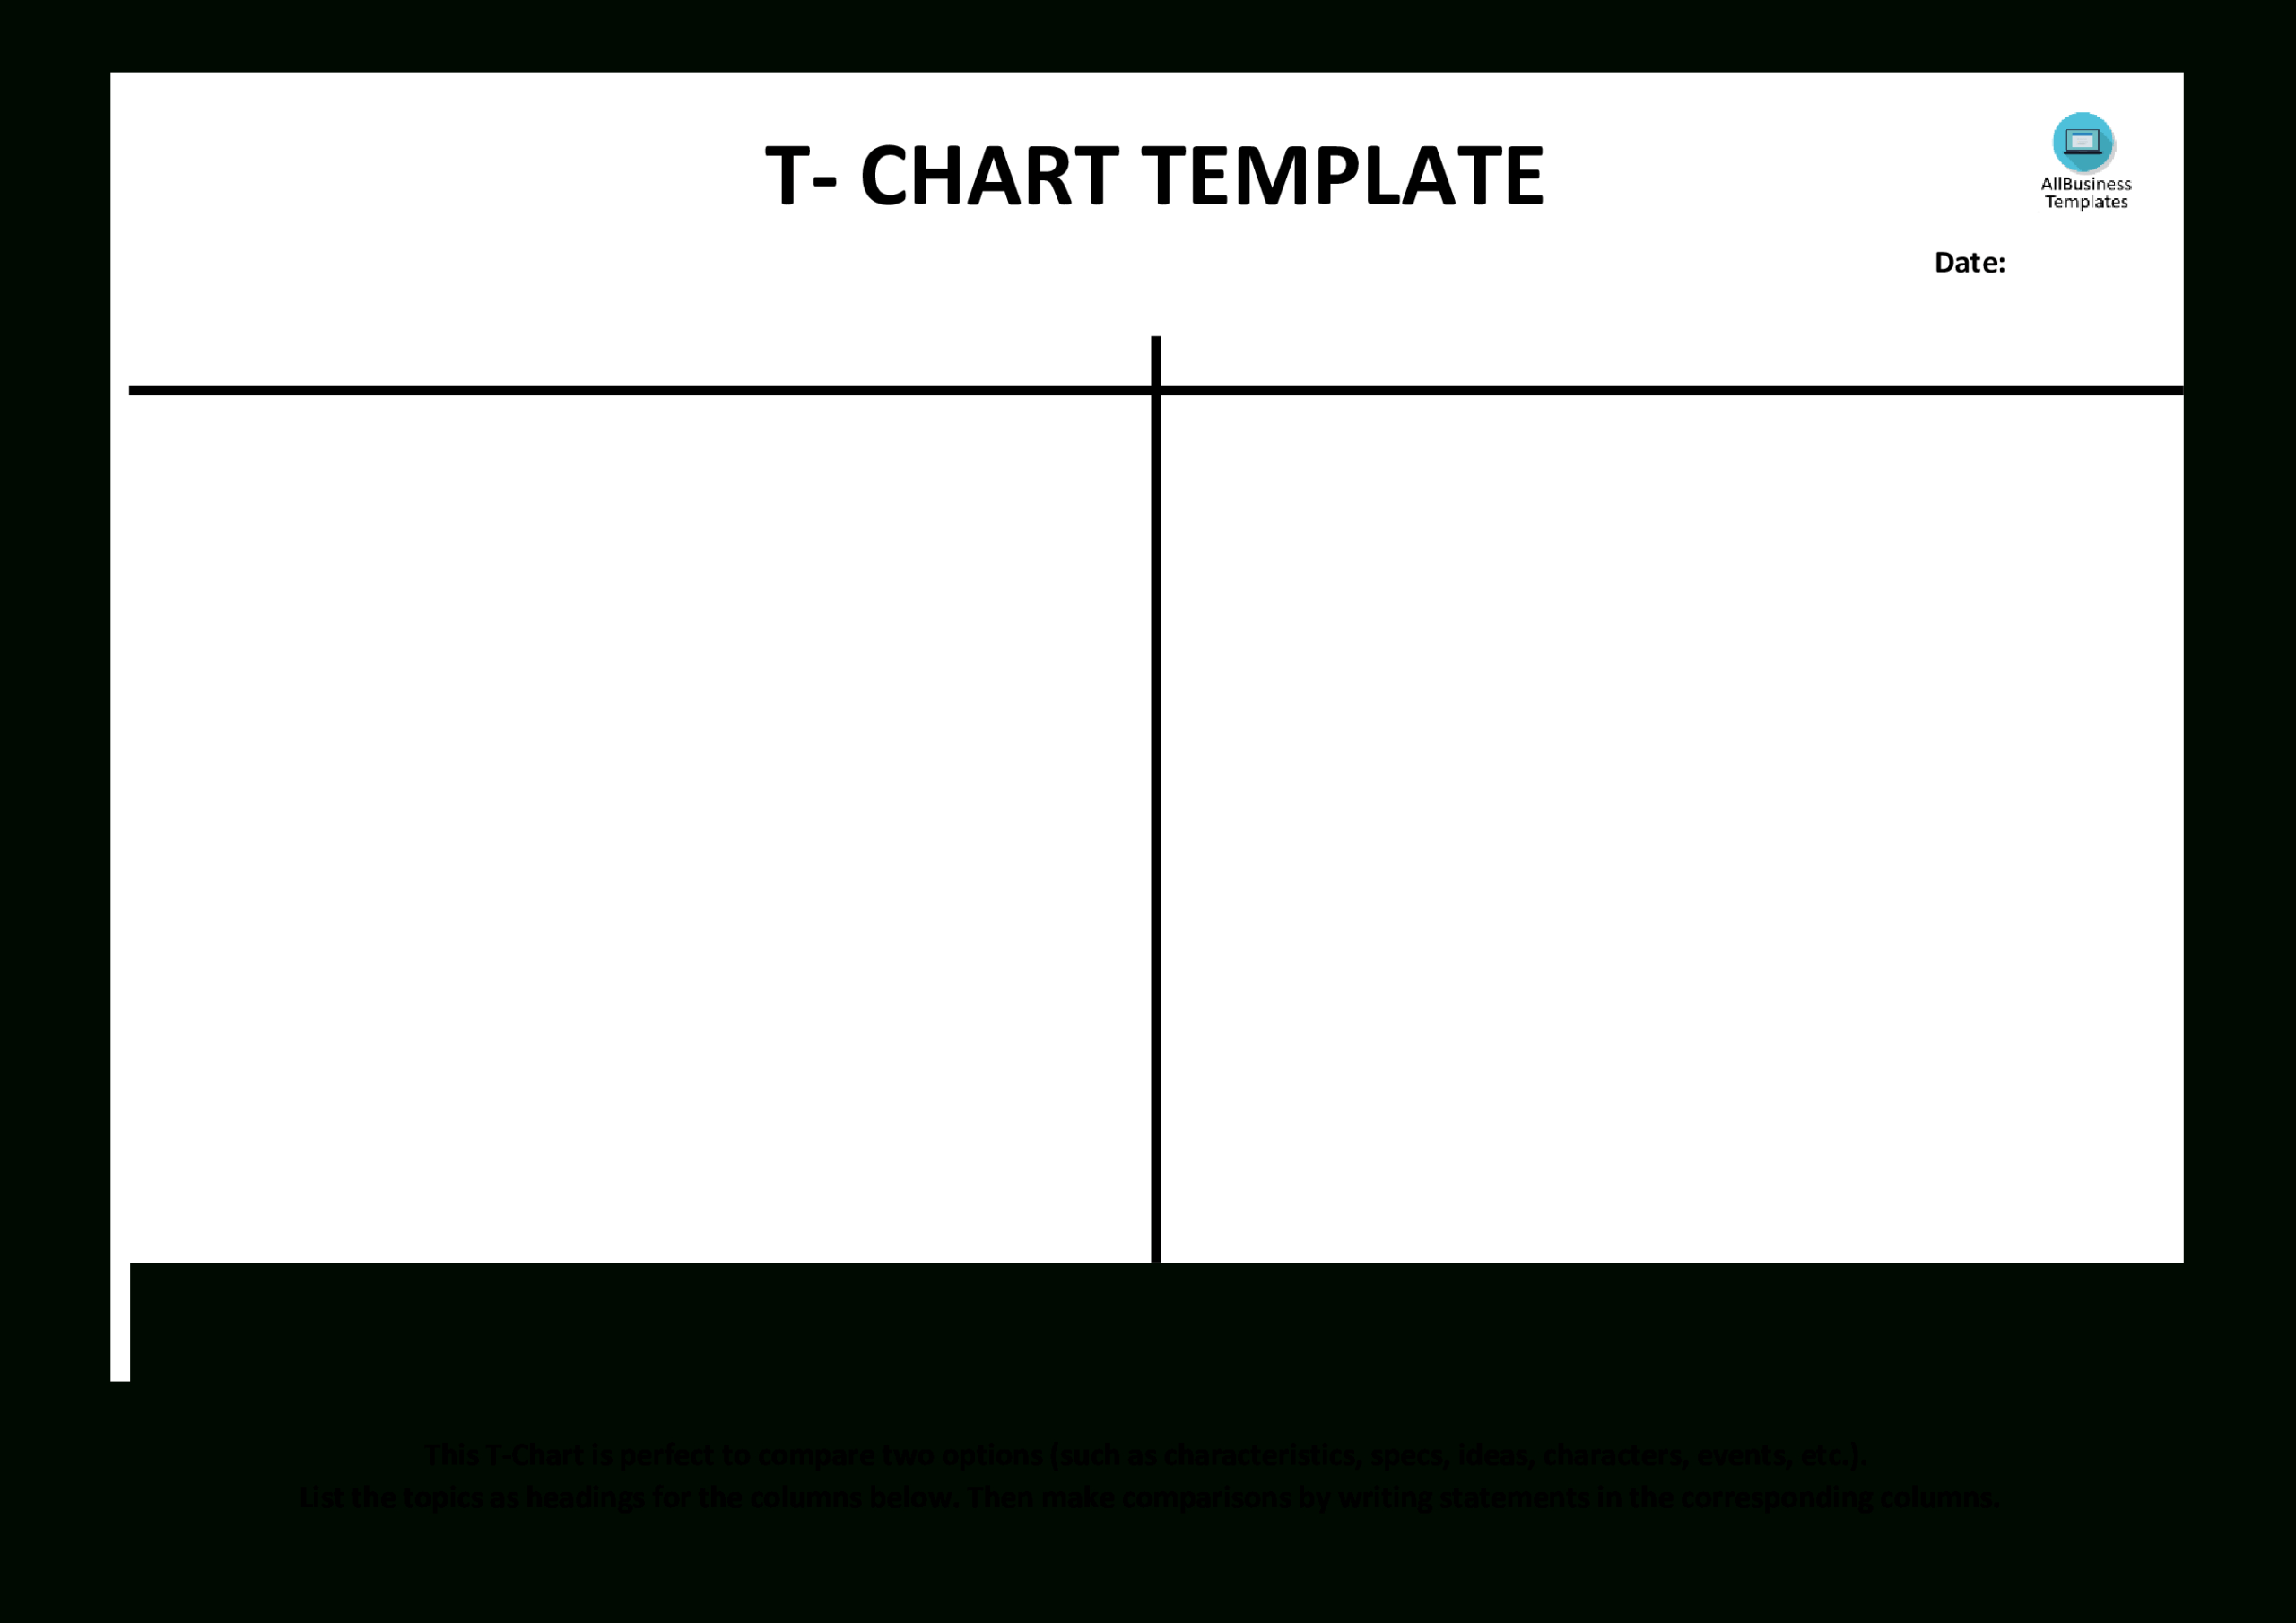 T Chart Example (Blank) | Templates At Allbusinesstemplates With T Chart Template For Word